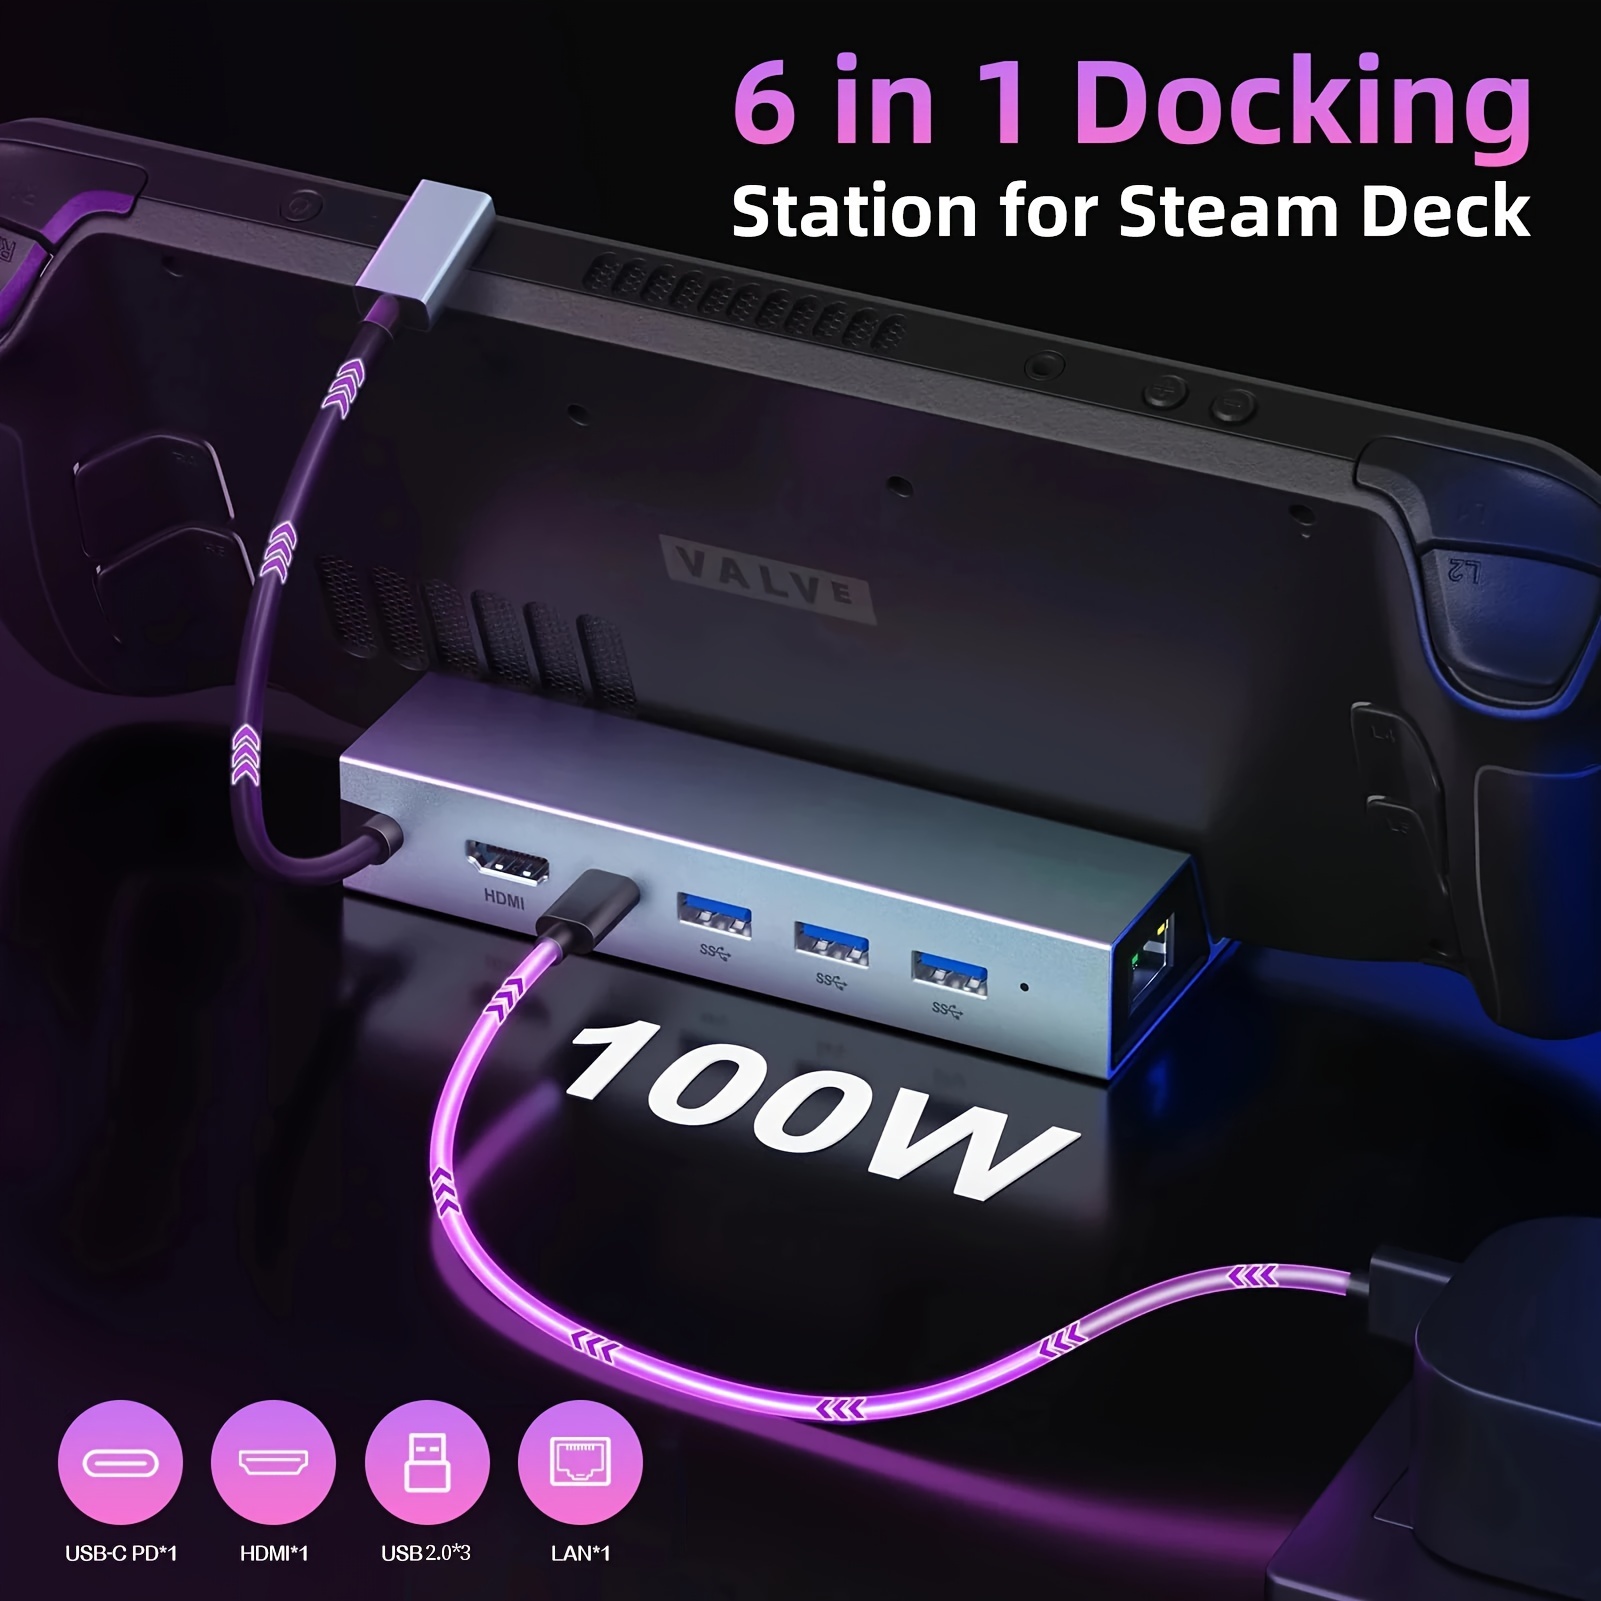 

6 In 1 Docking Station For Steam Deck With Hdtv 2.0 Rj45 Ethernet Usb 2.0 100w Charging Usb-c Port Compatible With Steam Deck